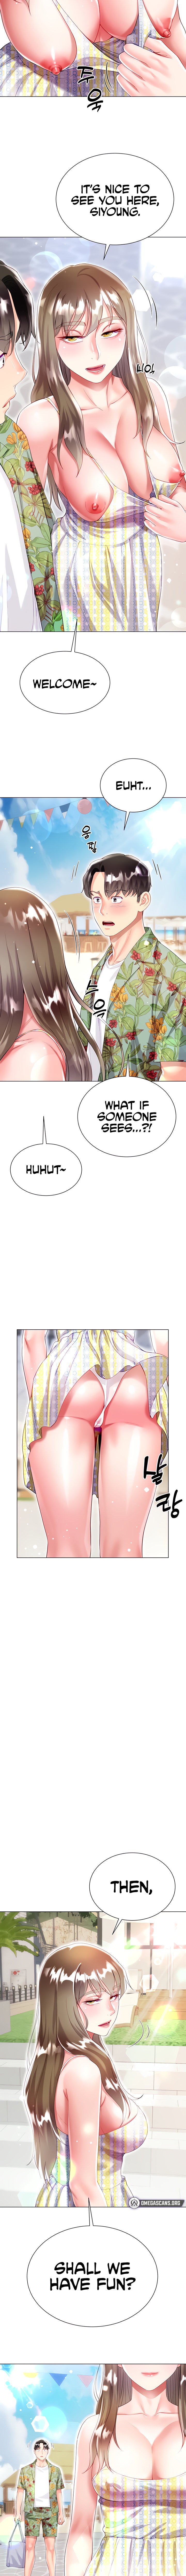 my-sister-in-laws-skirt-chap-37-8